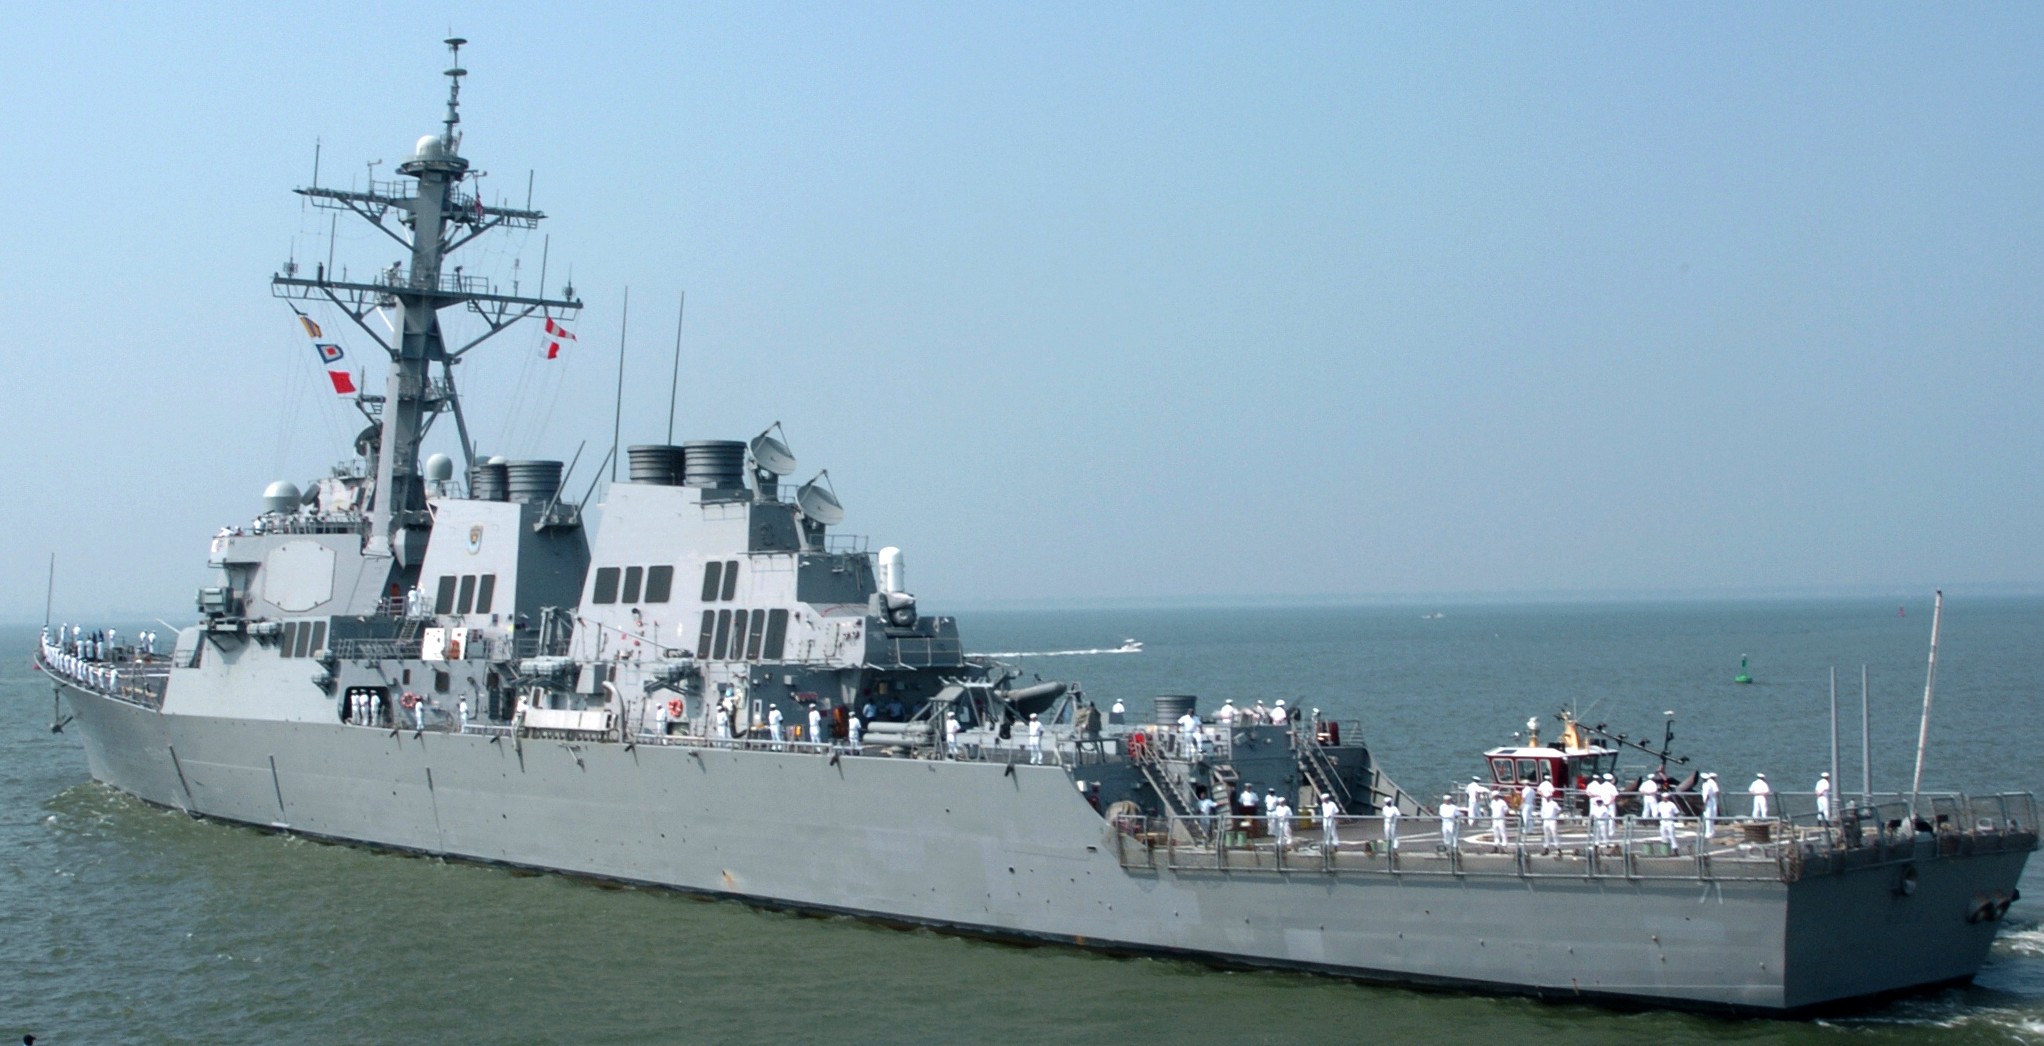 ddg-71 uss ross guided missile destroyer arleigh burke class aegis bmd 99